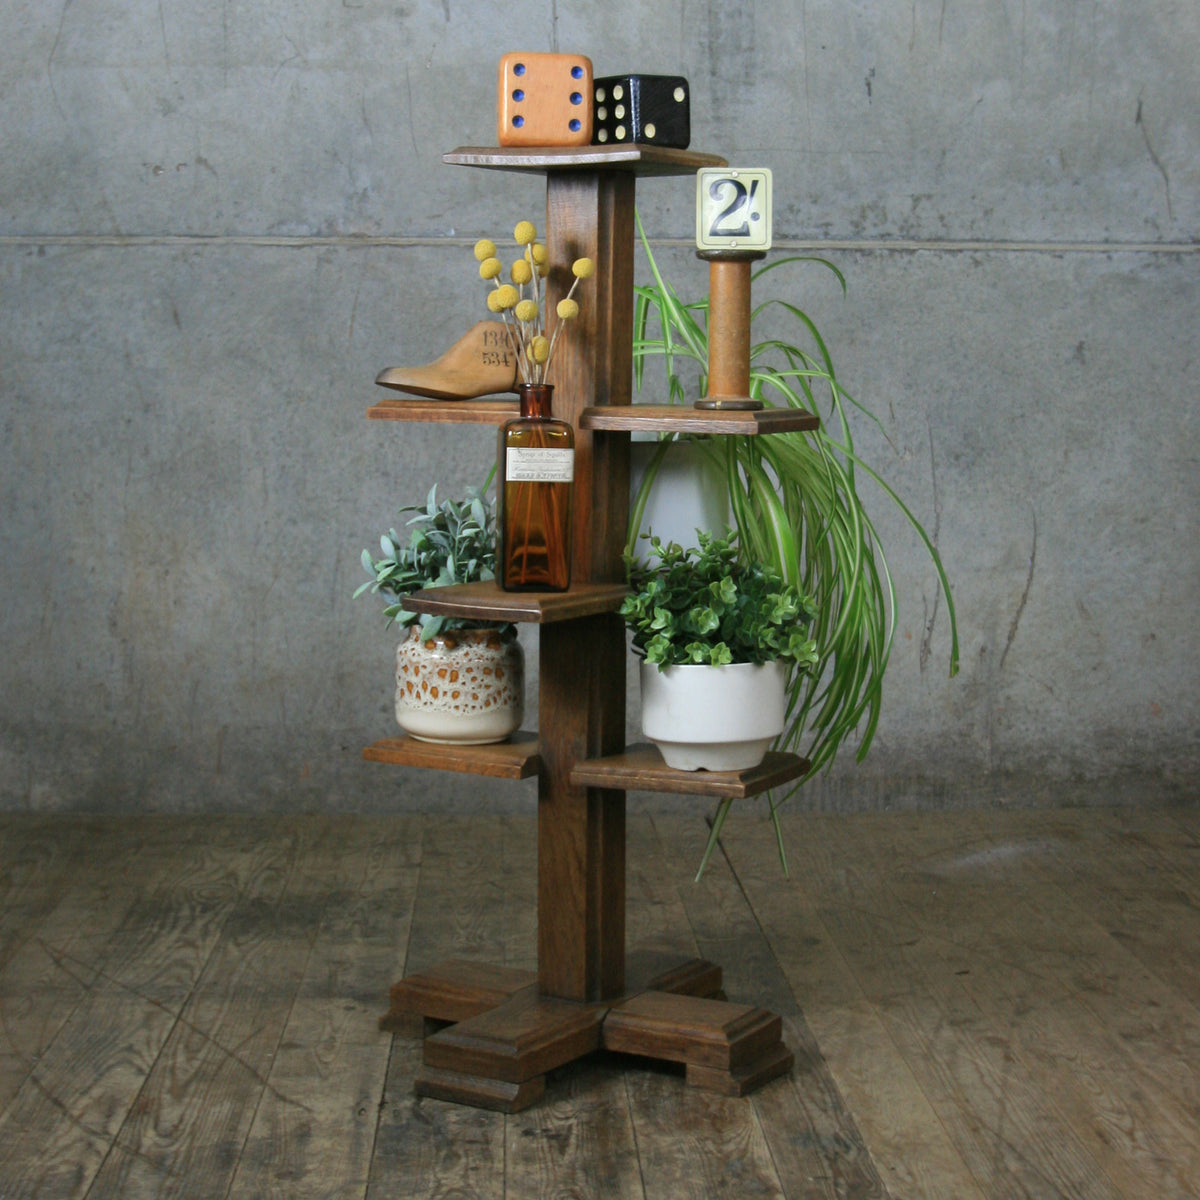 Antique Mustard Plant Stand for Displaying Curiosities and Plants